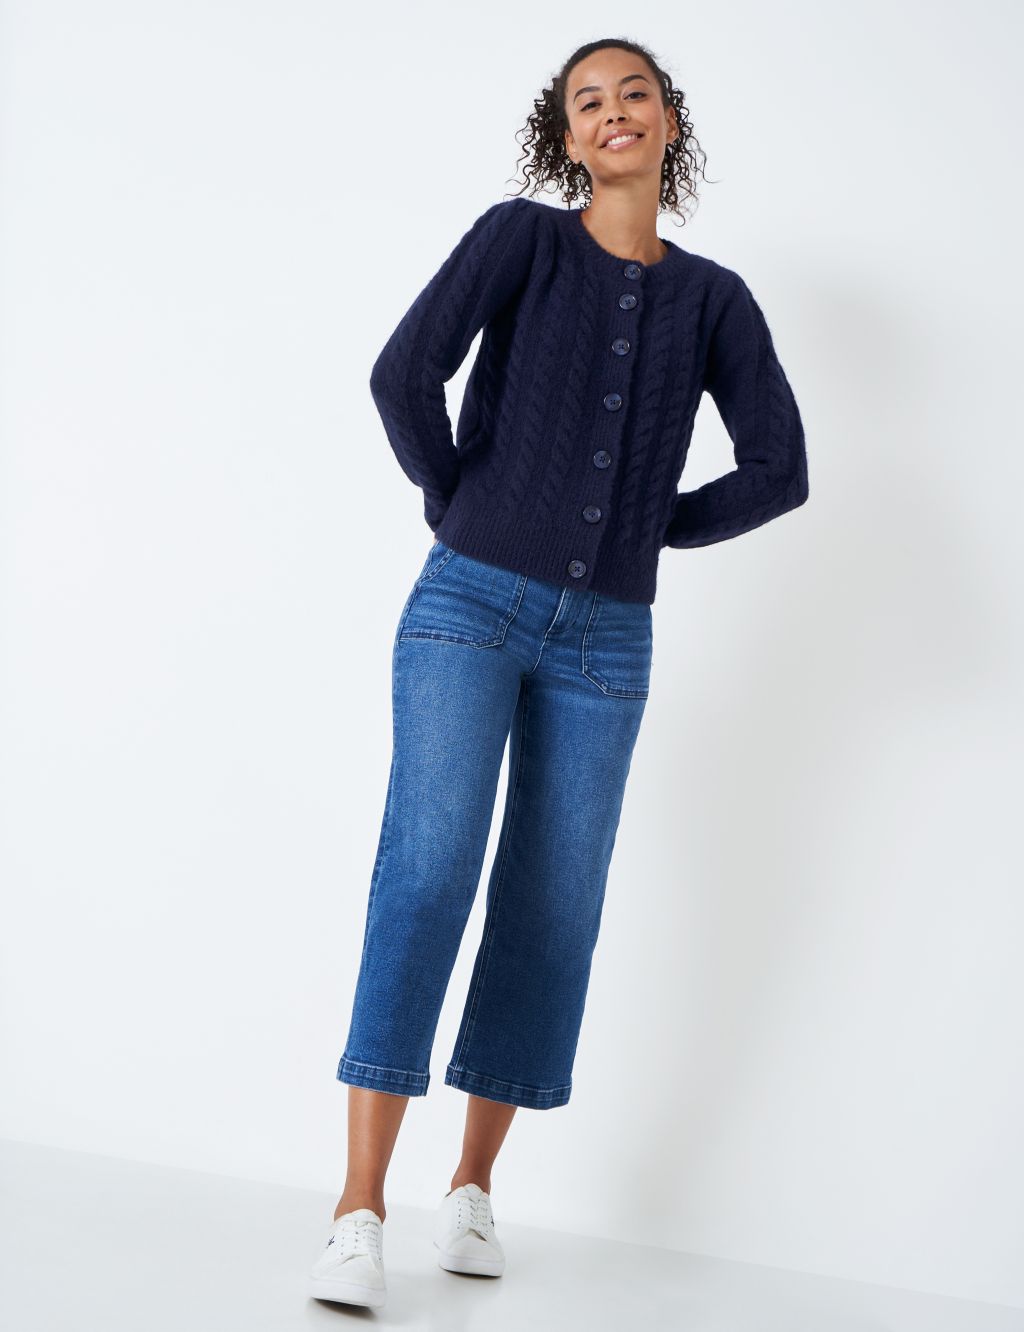 Cable Knit Crew Neck Button Front Cardigan image 1